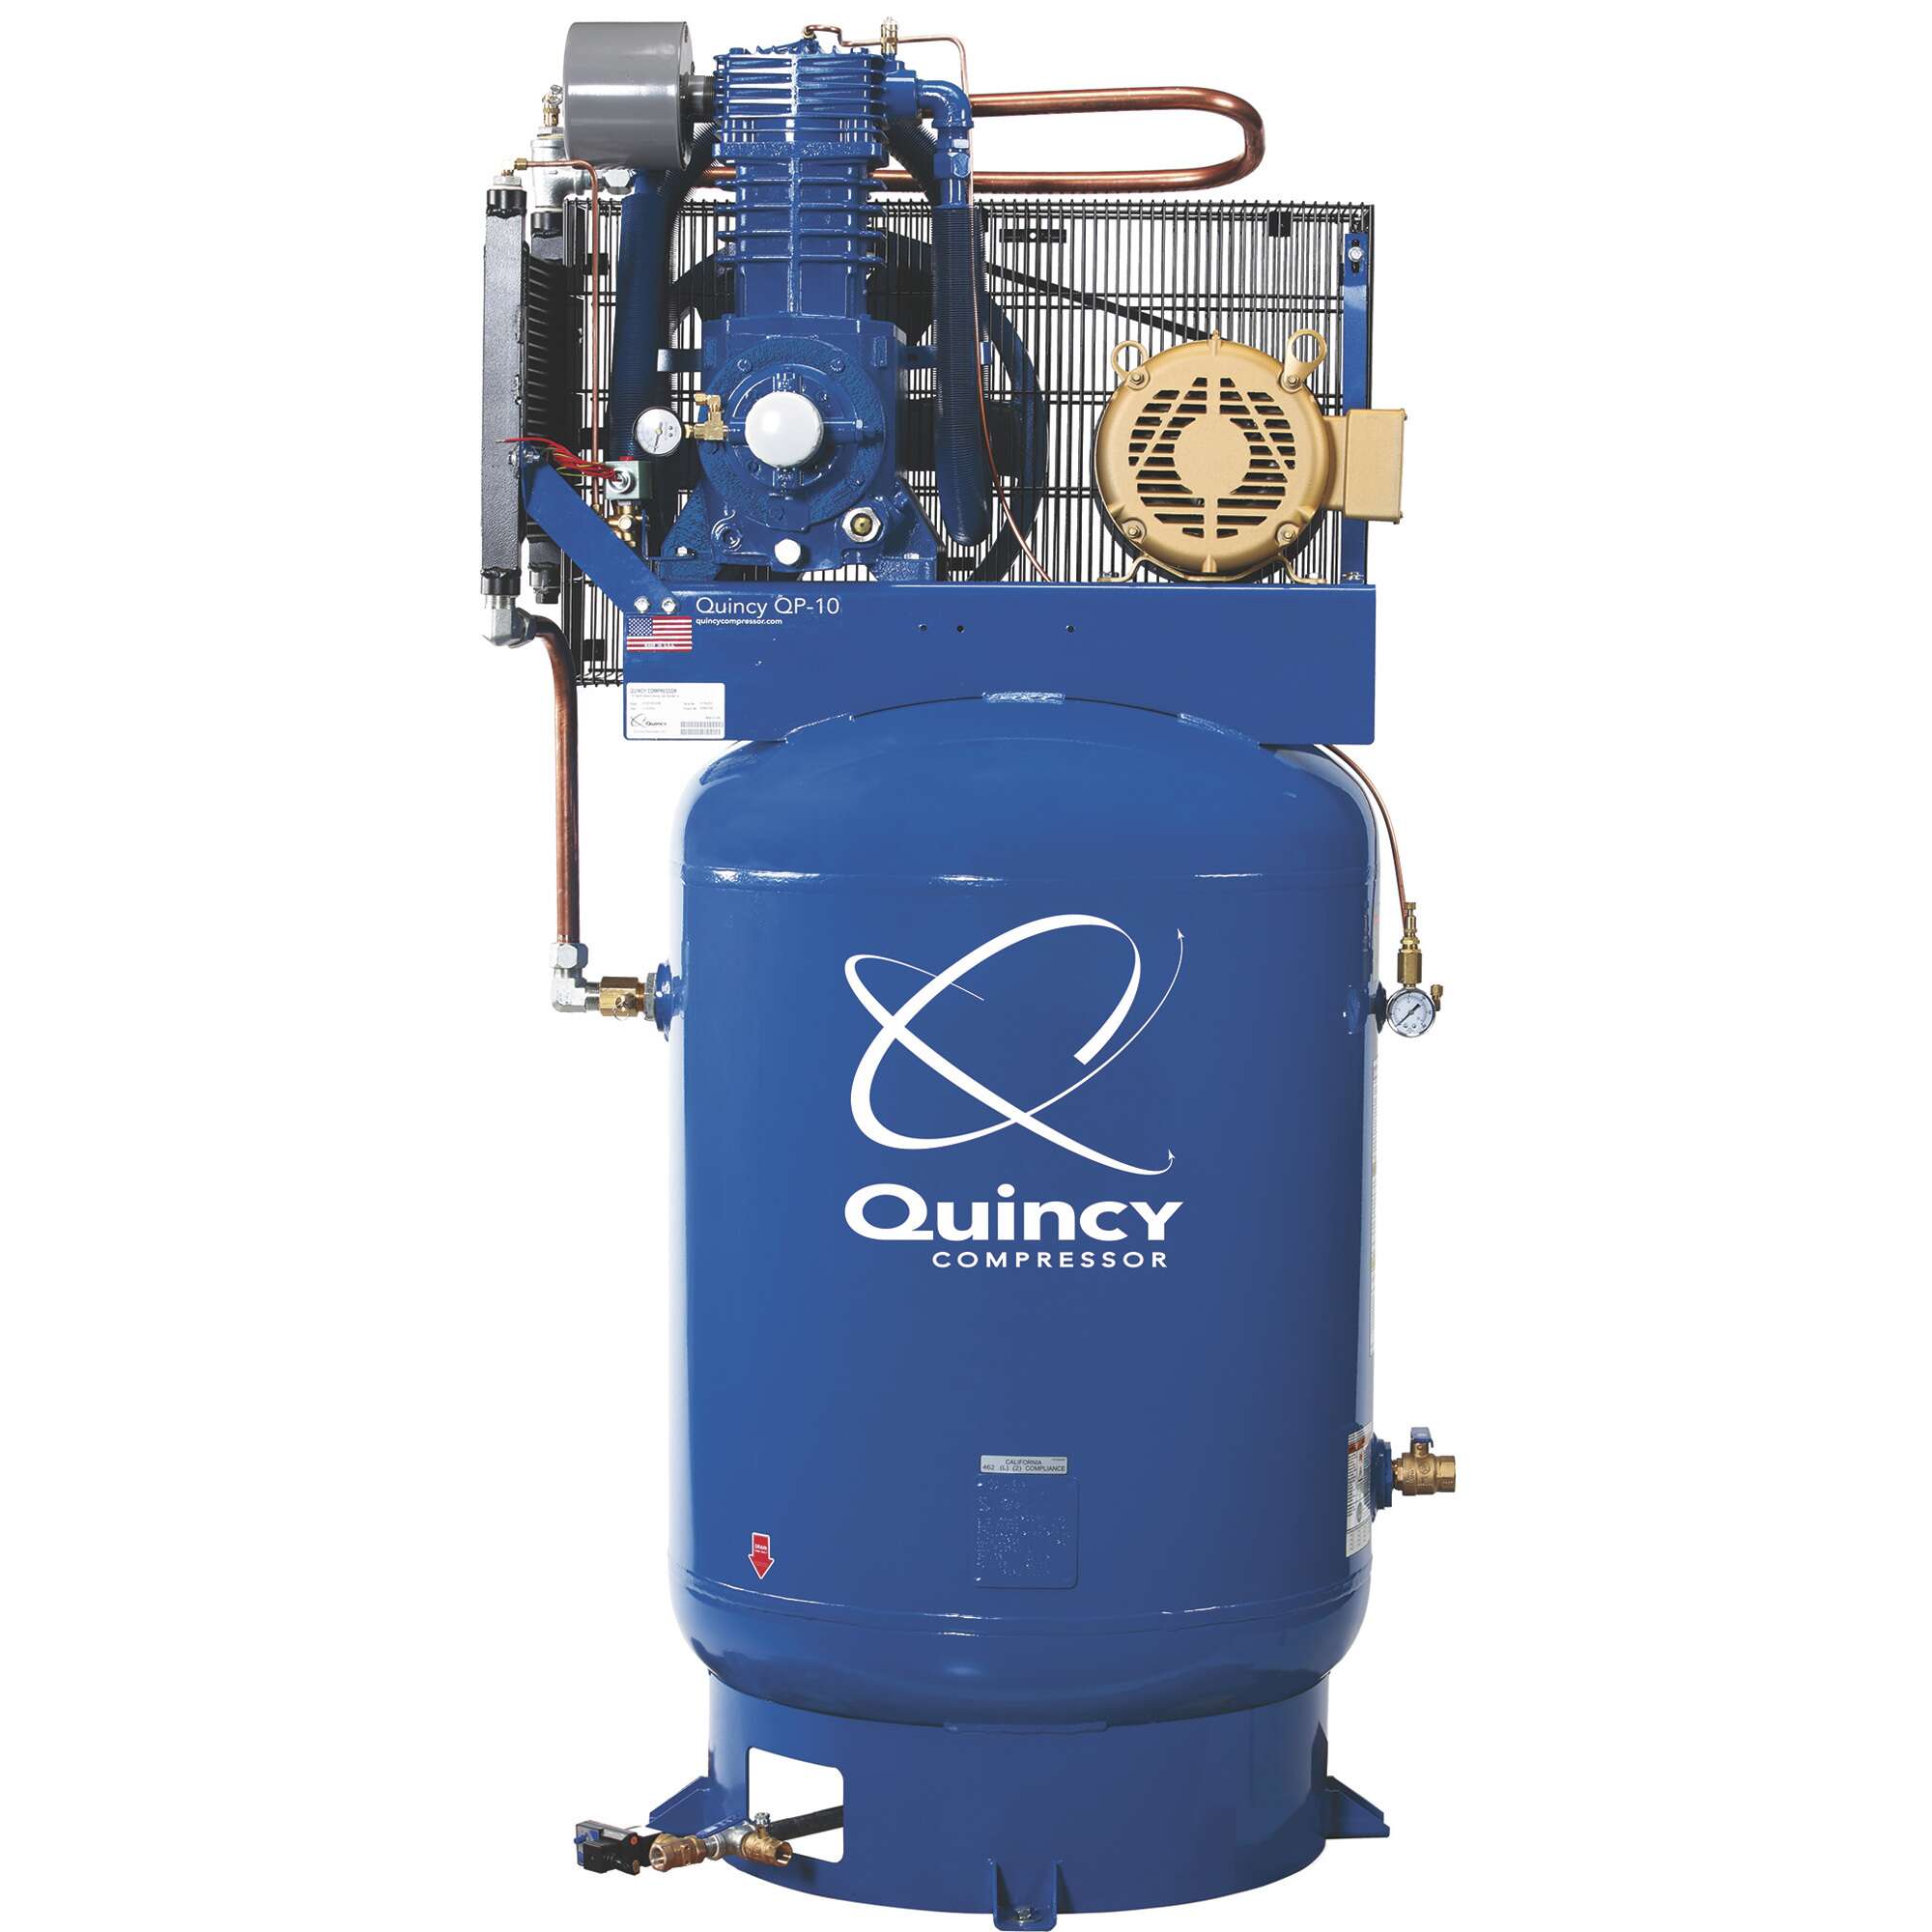 Quincy QP Pressure Lubricated Reciprocating Air Compressor with MAX Package 10 HP 230 Volt 3 Phase 120 Gallon Vertical